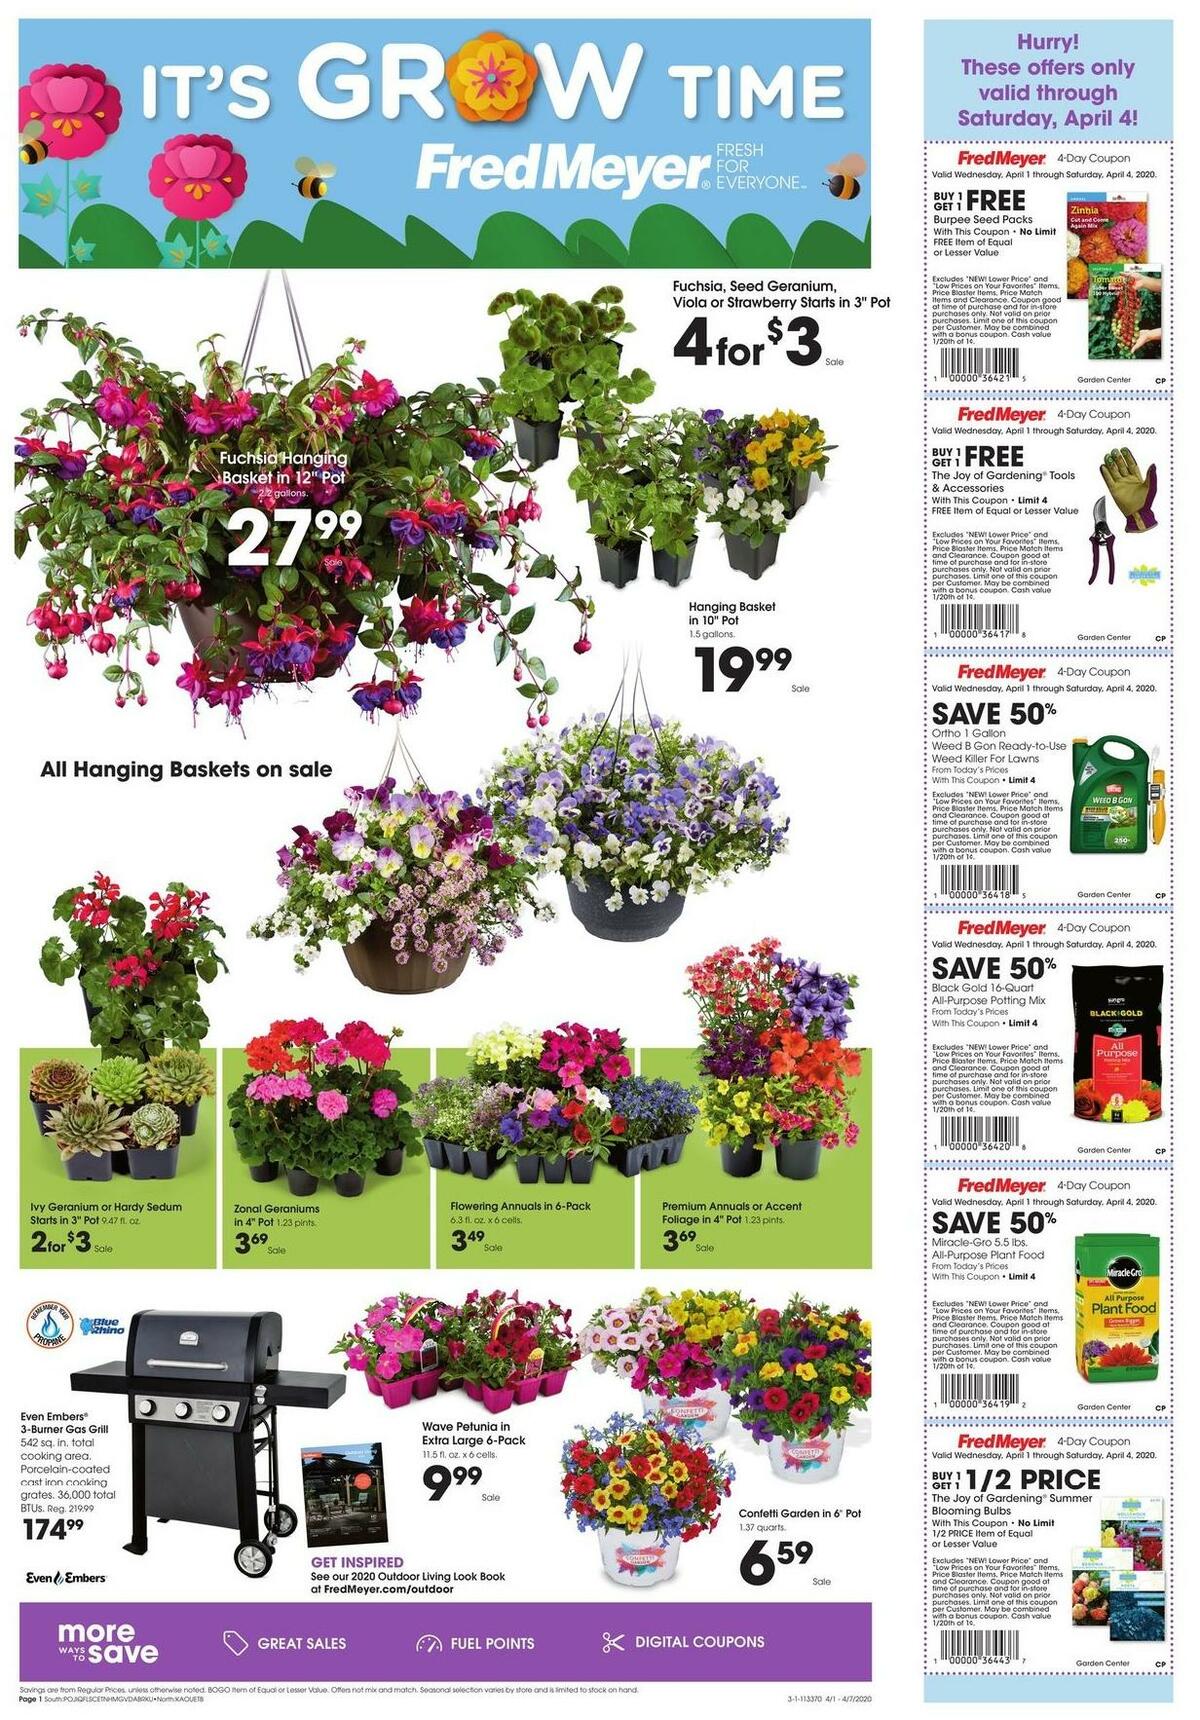 Fred Meyer Garden Weekly Ad & Specials from April 1